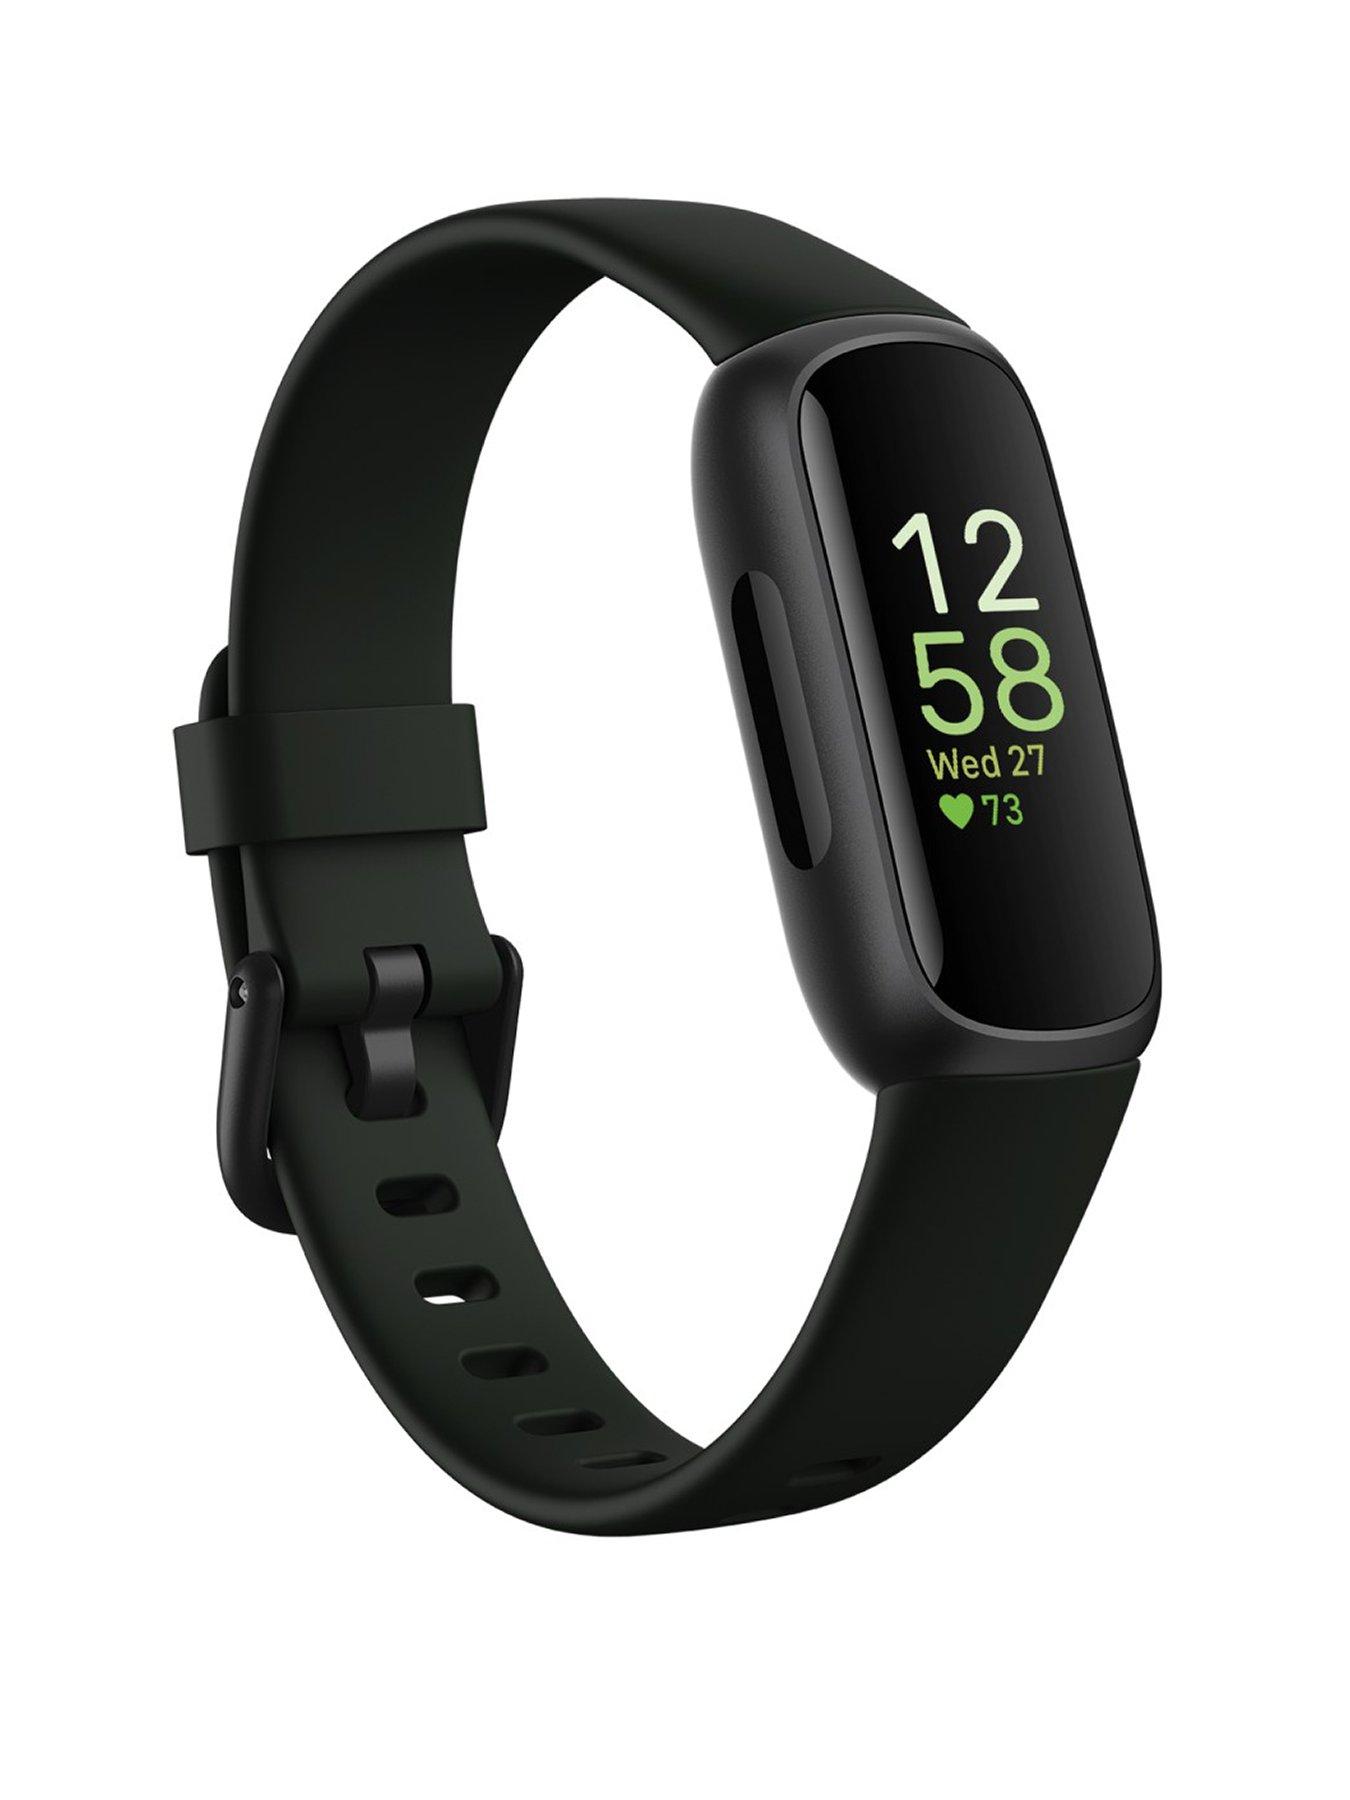 Get to Know Fitbit Aria 2: Fitbit's Most Advanced Wi-Fi Smart